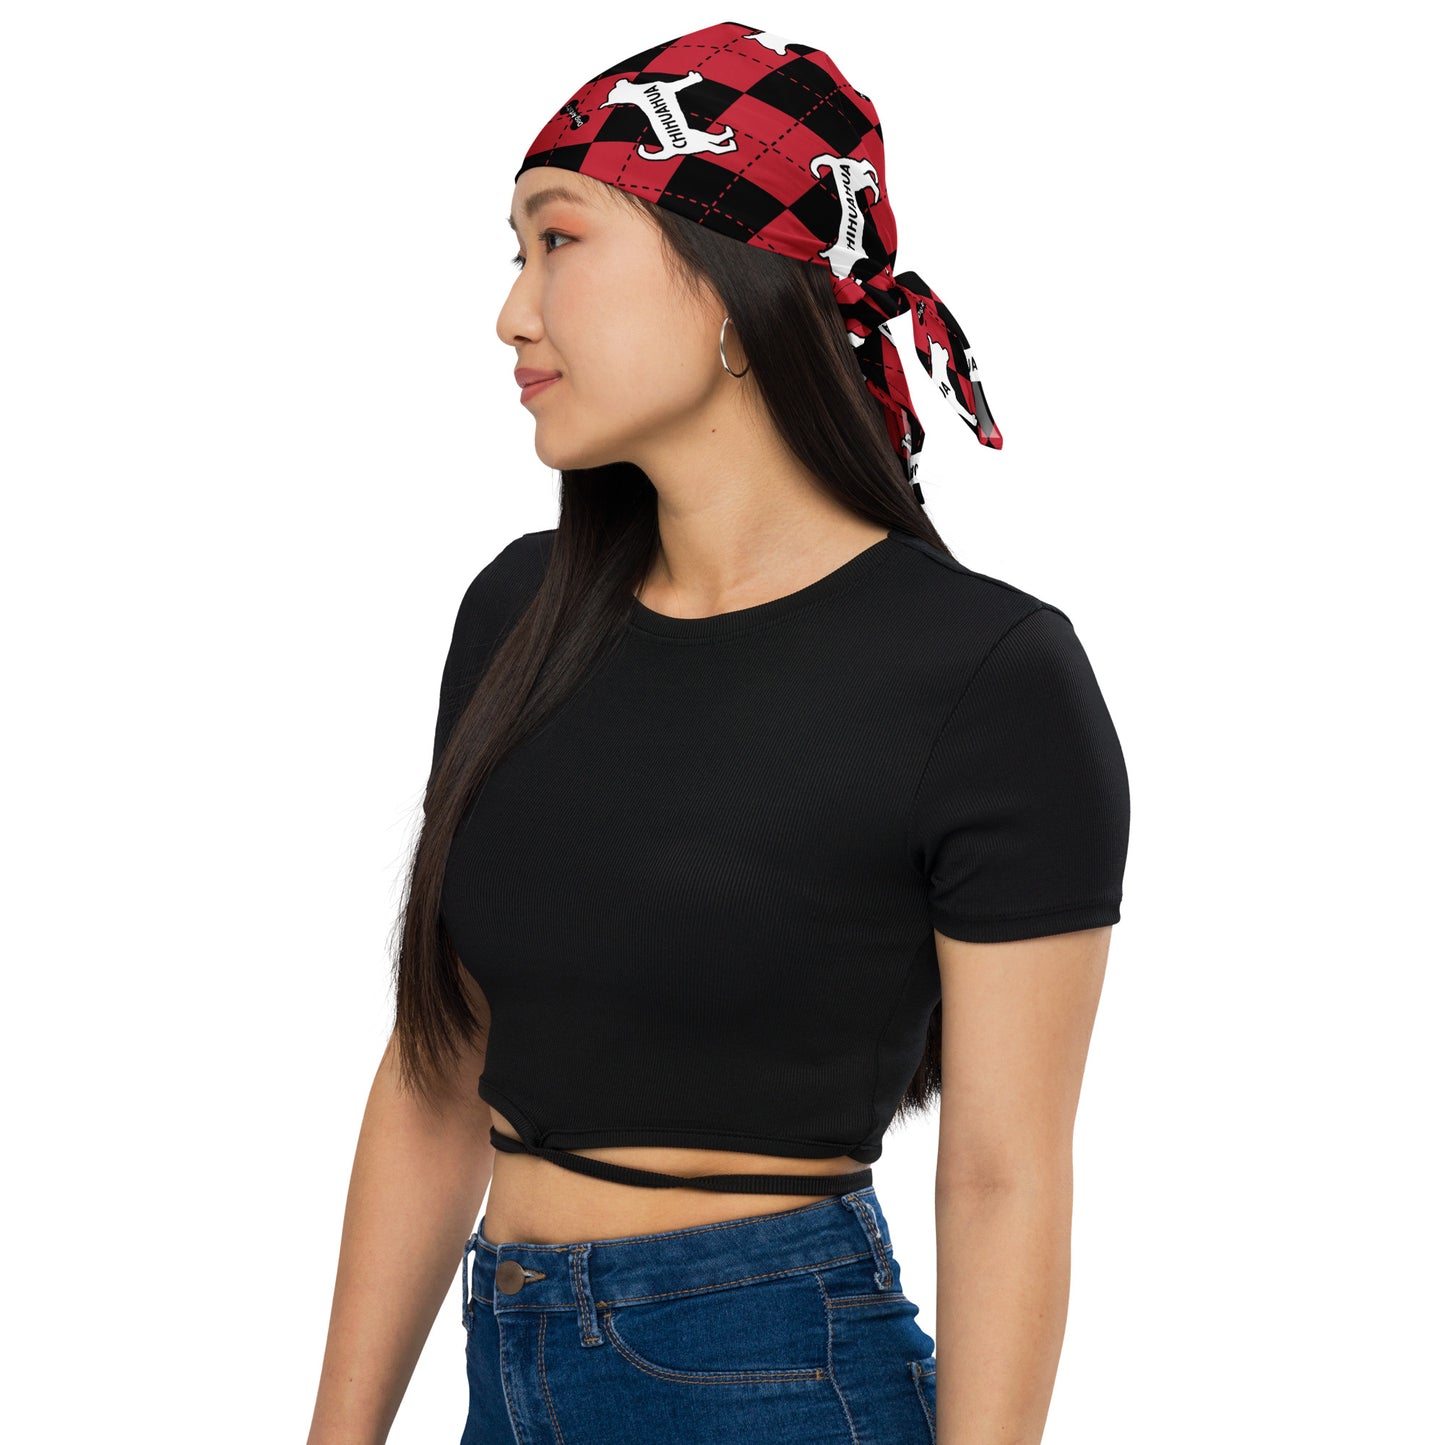 Chihuahua Argyle Red and Black All-over print bandana